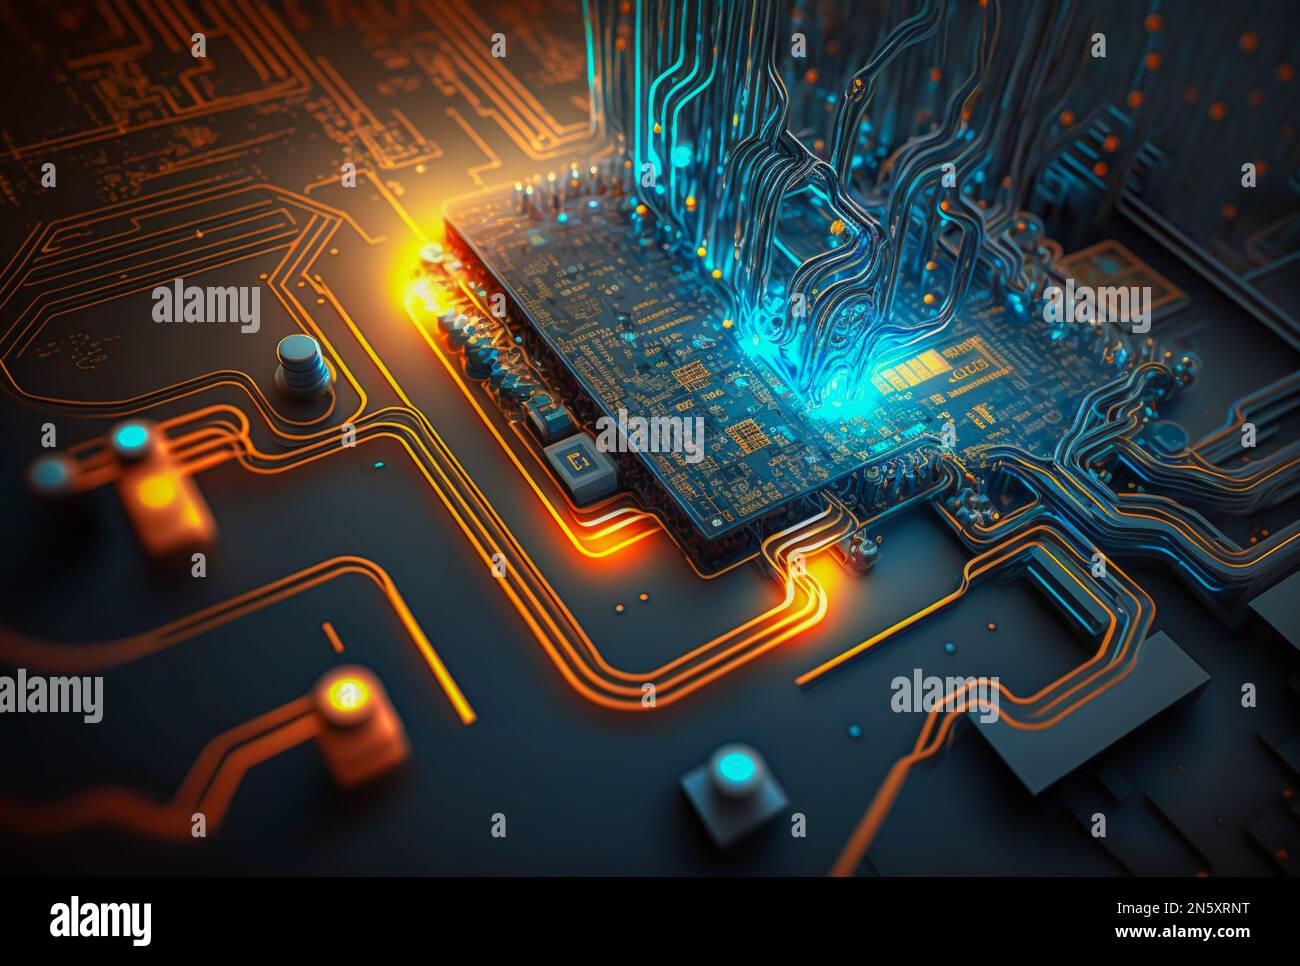 illustration of a futuristic digital landscape, symbolized by an abstract circuit design Stock Photo